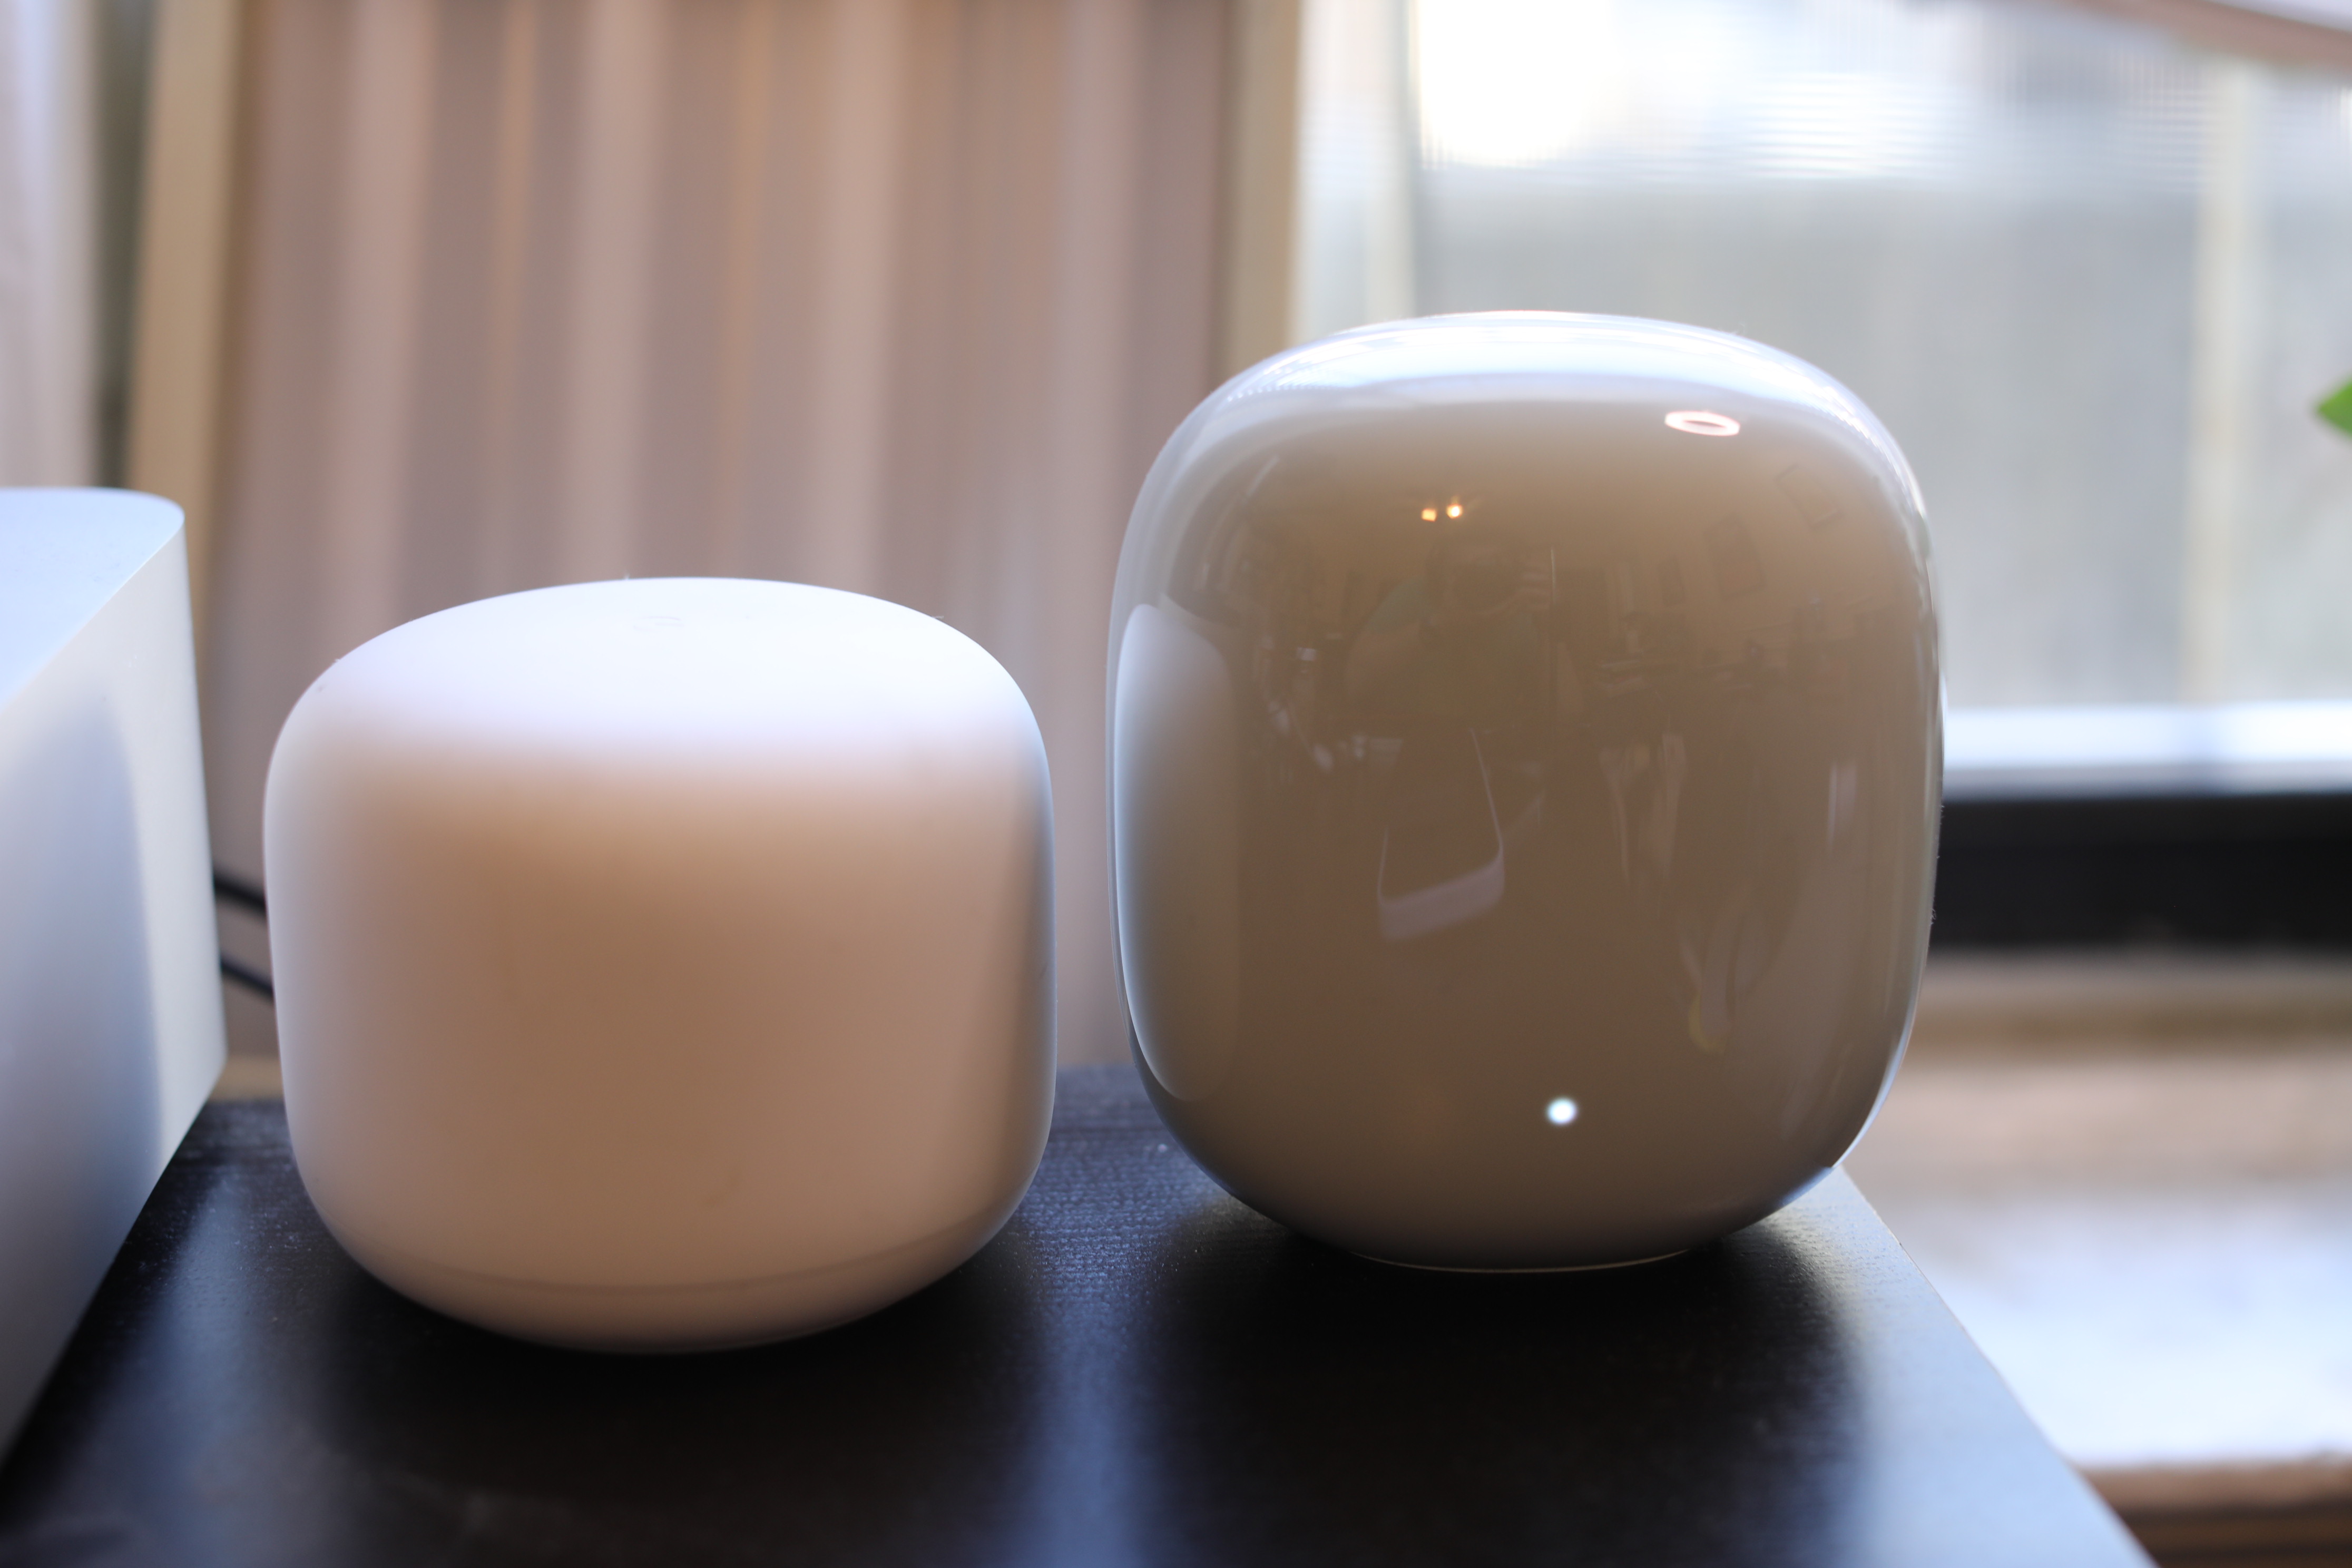 Google’s Nest Wifi Pro is a dead simple way to bring Wi-Fi 6E home